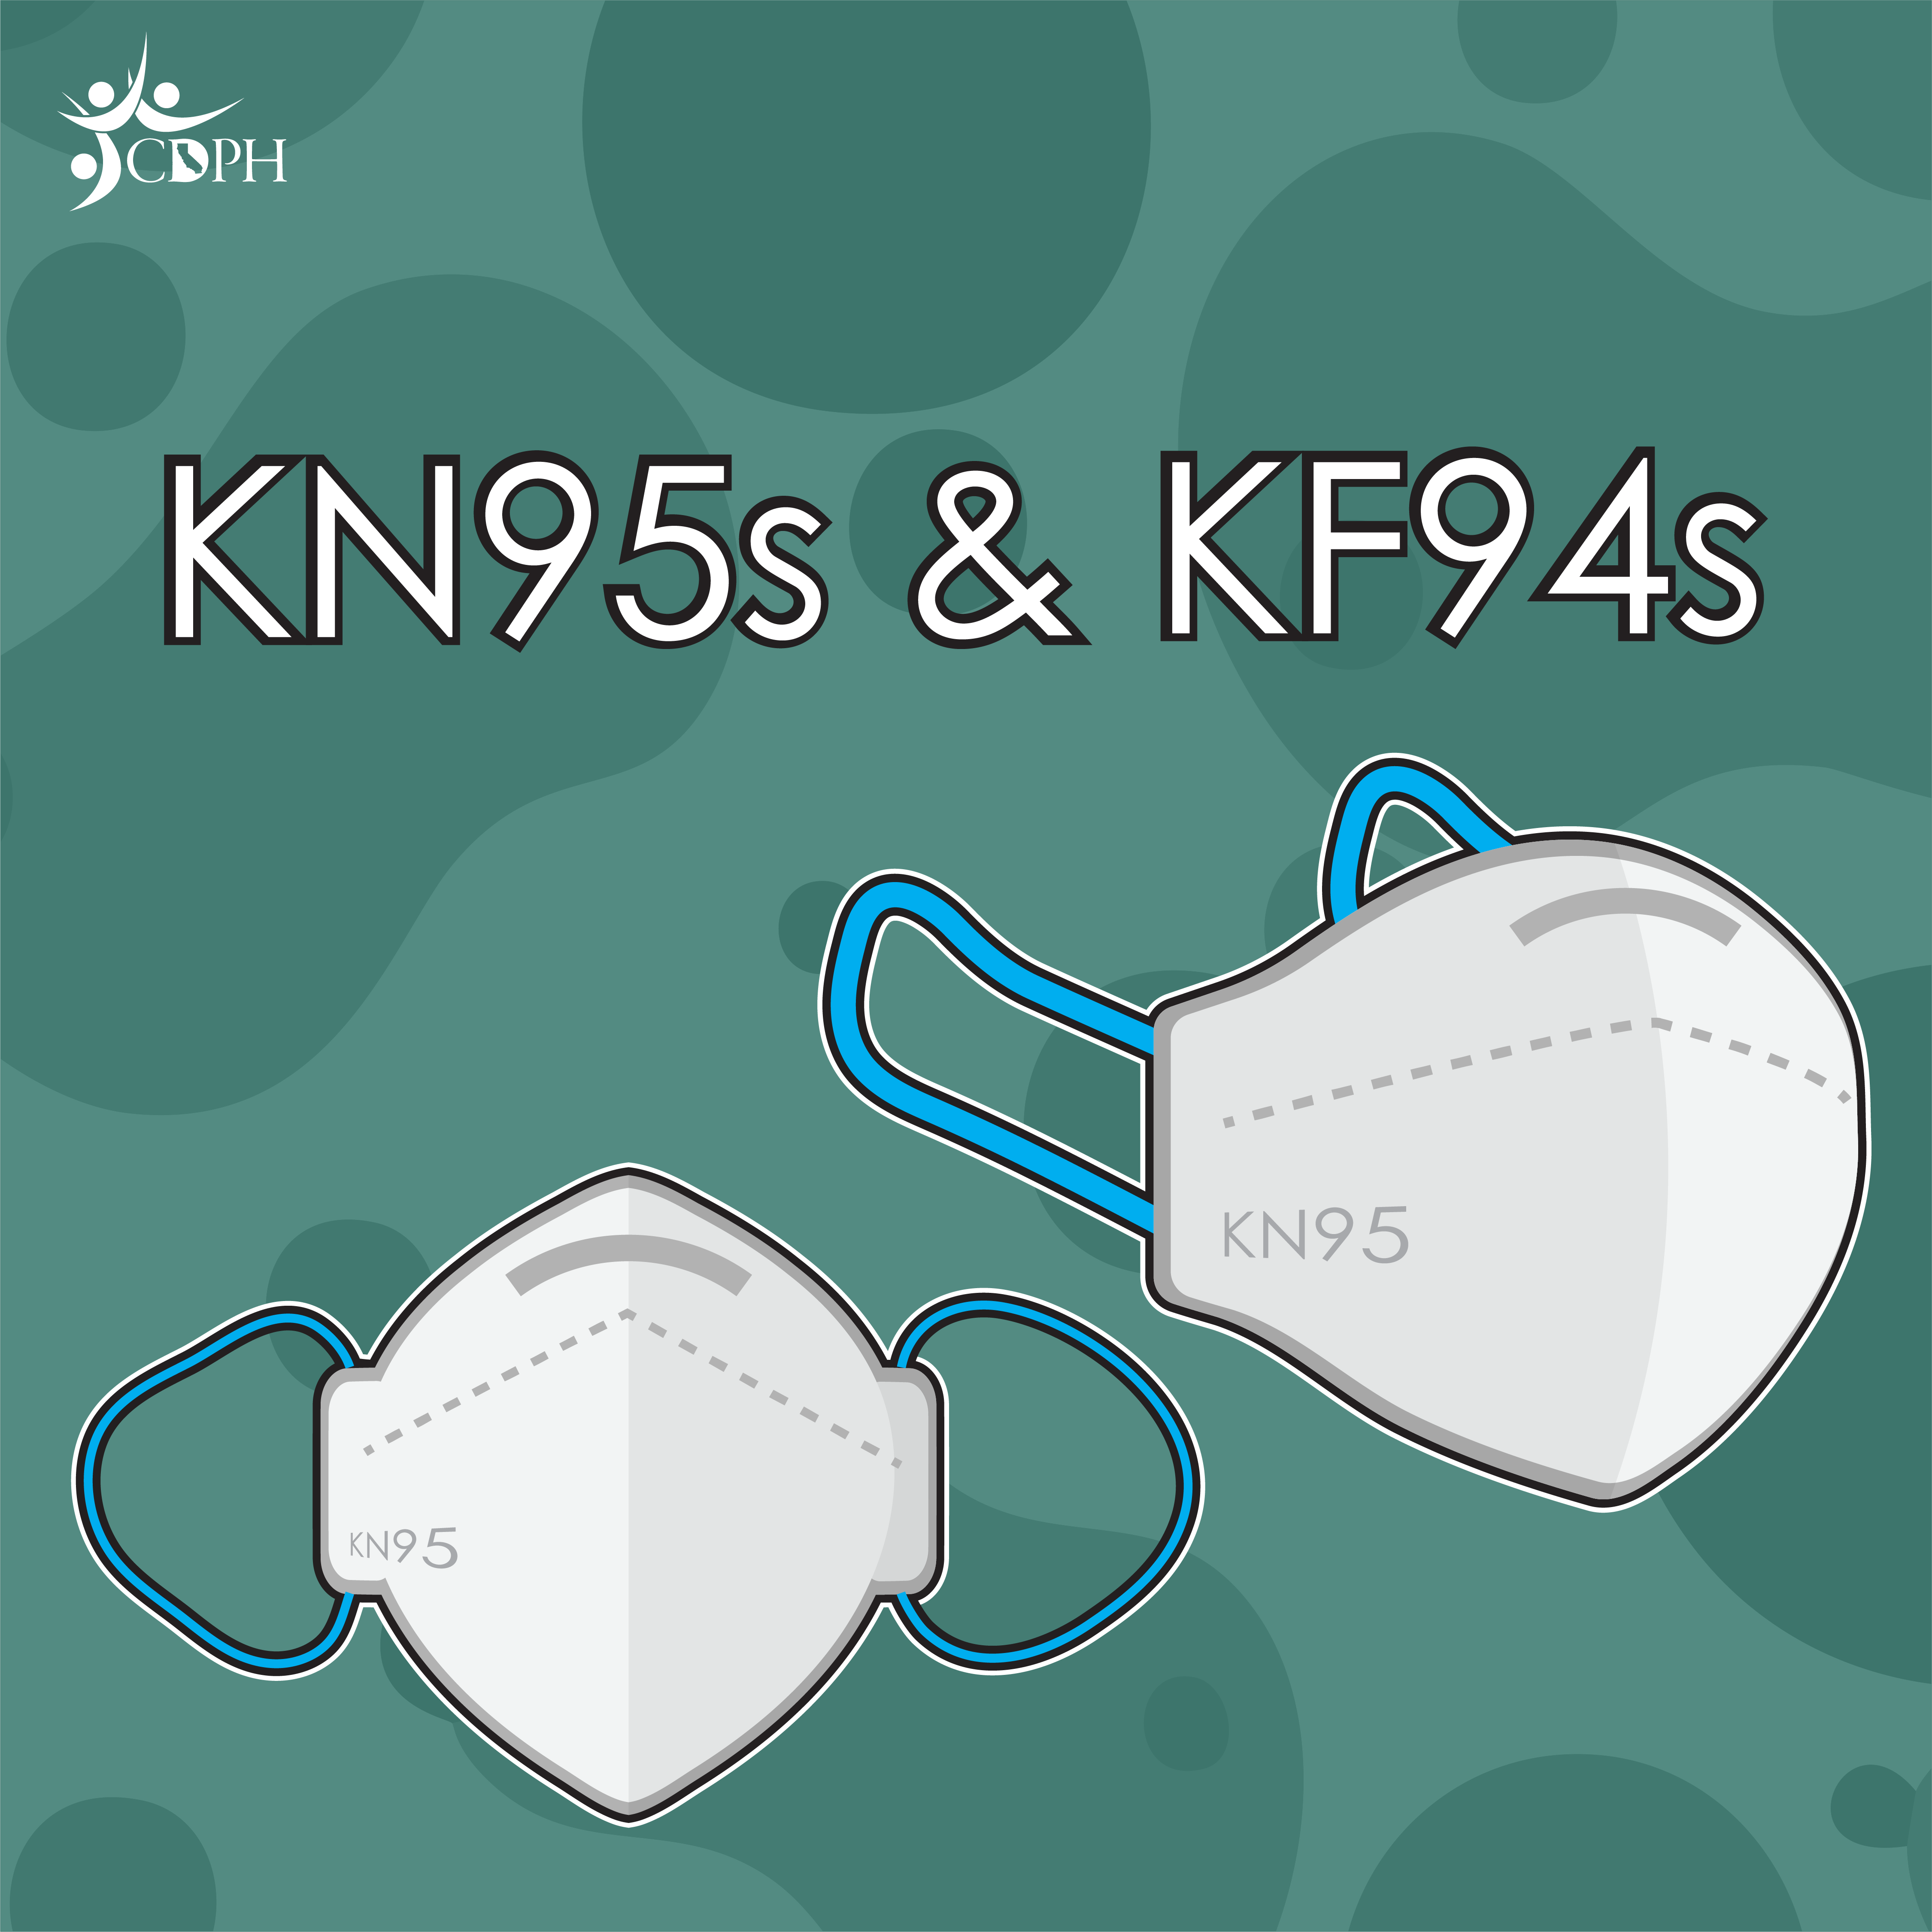 KN95s and KF94s masks